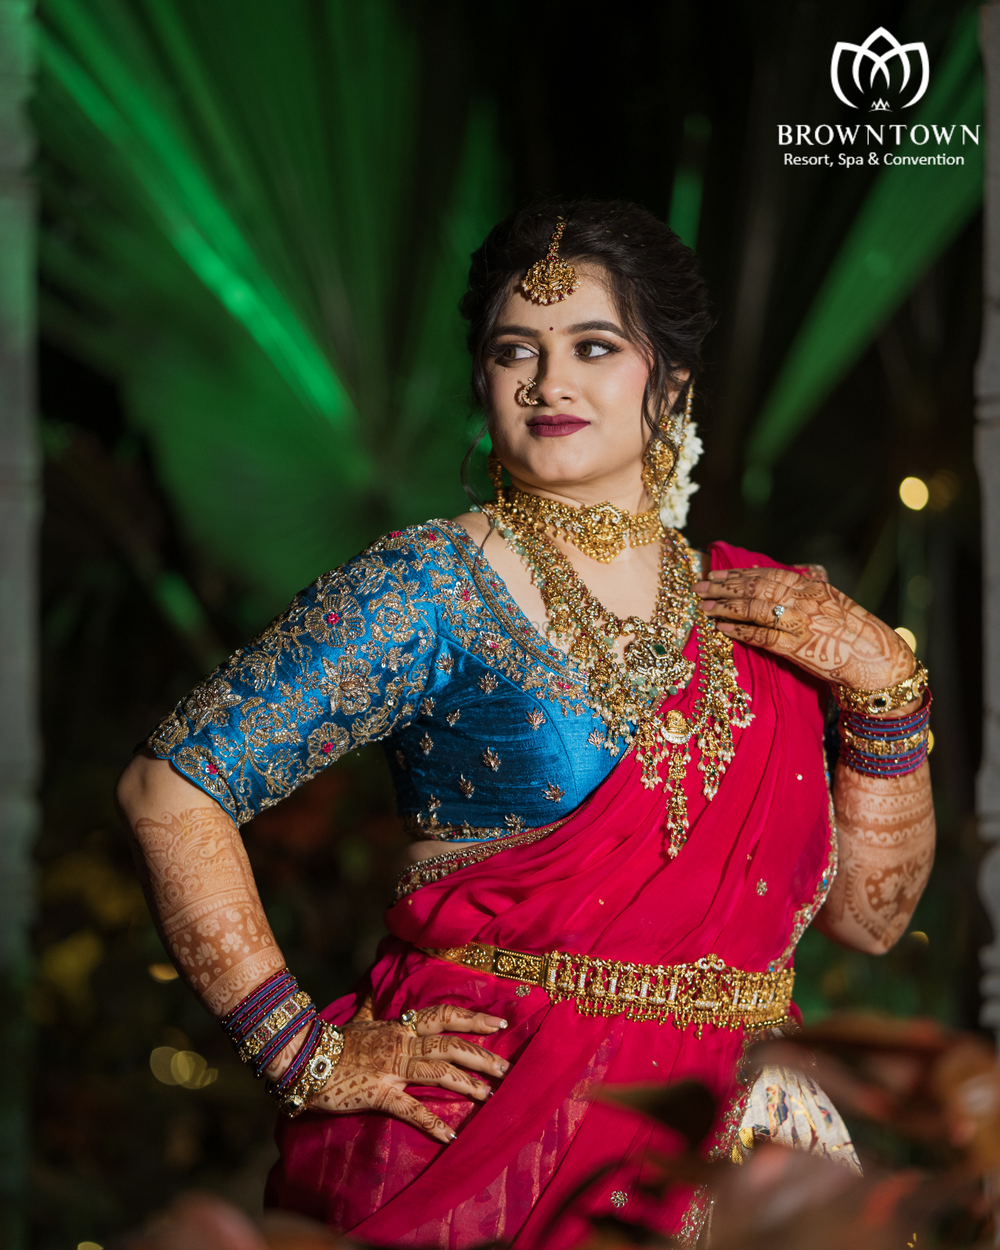 Photo From Priyanka Weds Bhargav - By Brown Town Resort Spa Conventions